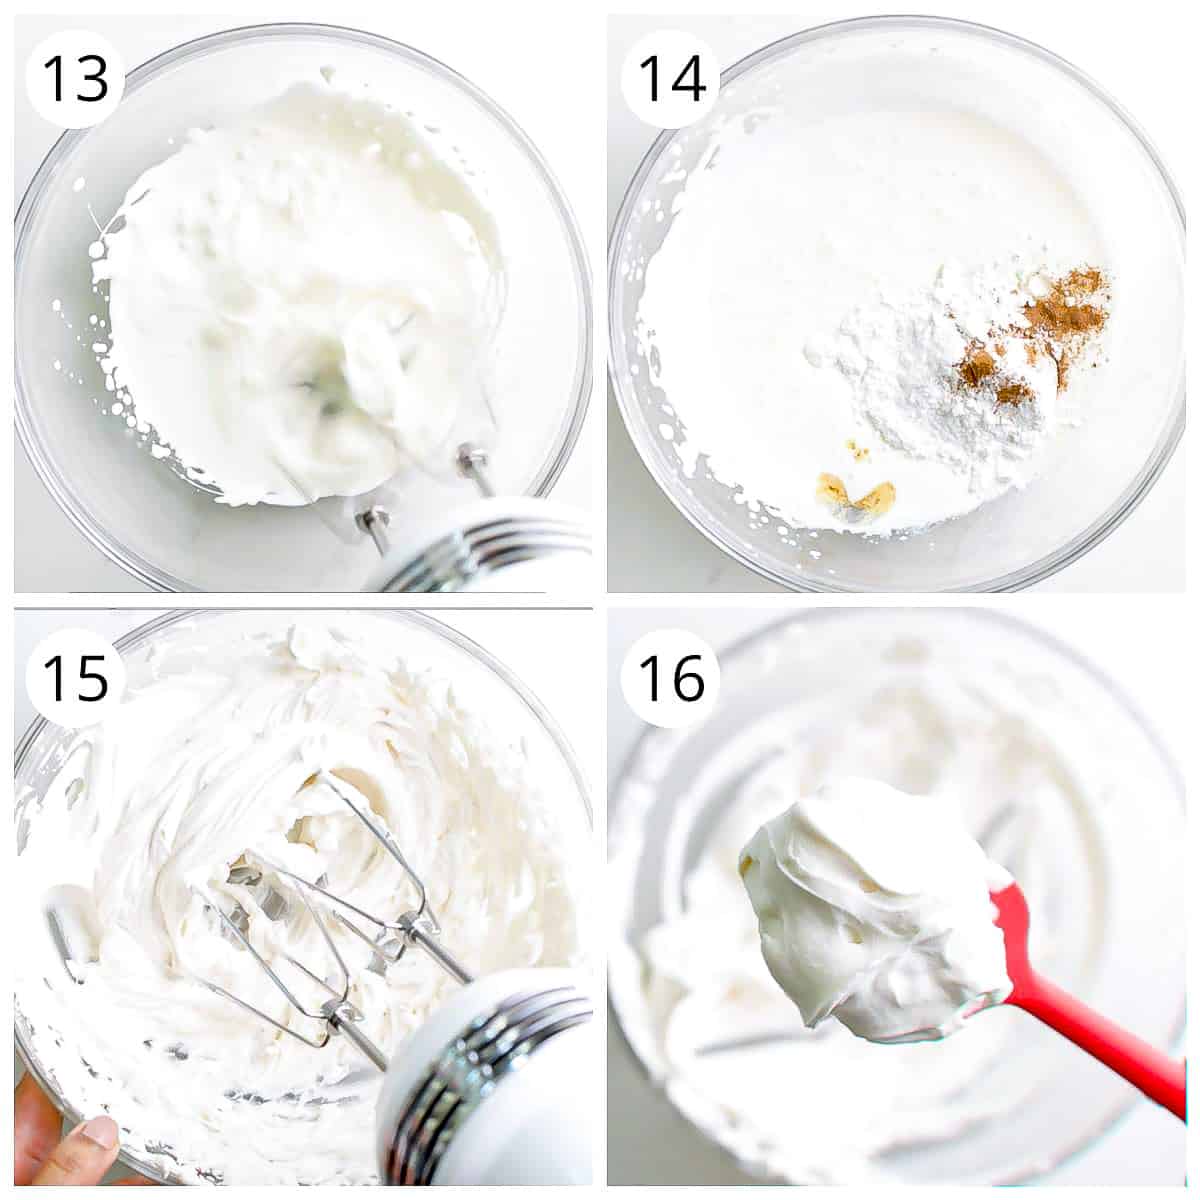 steps for making Pumpkin Pie spiced whipped cream frosting